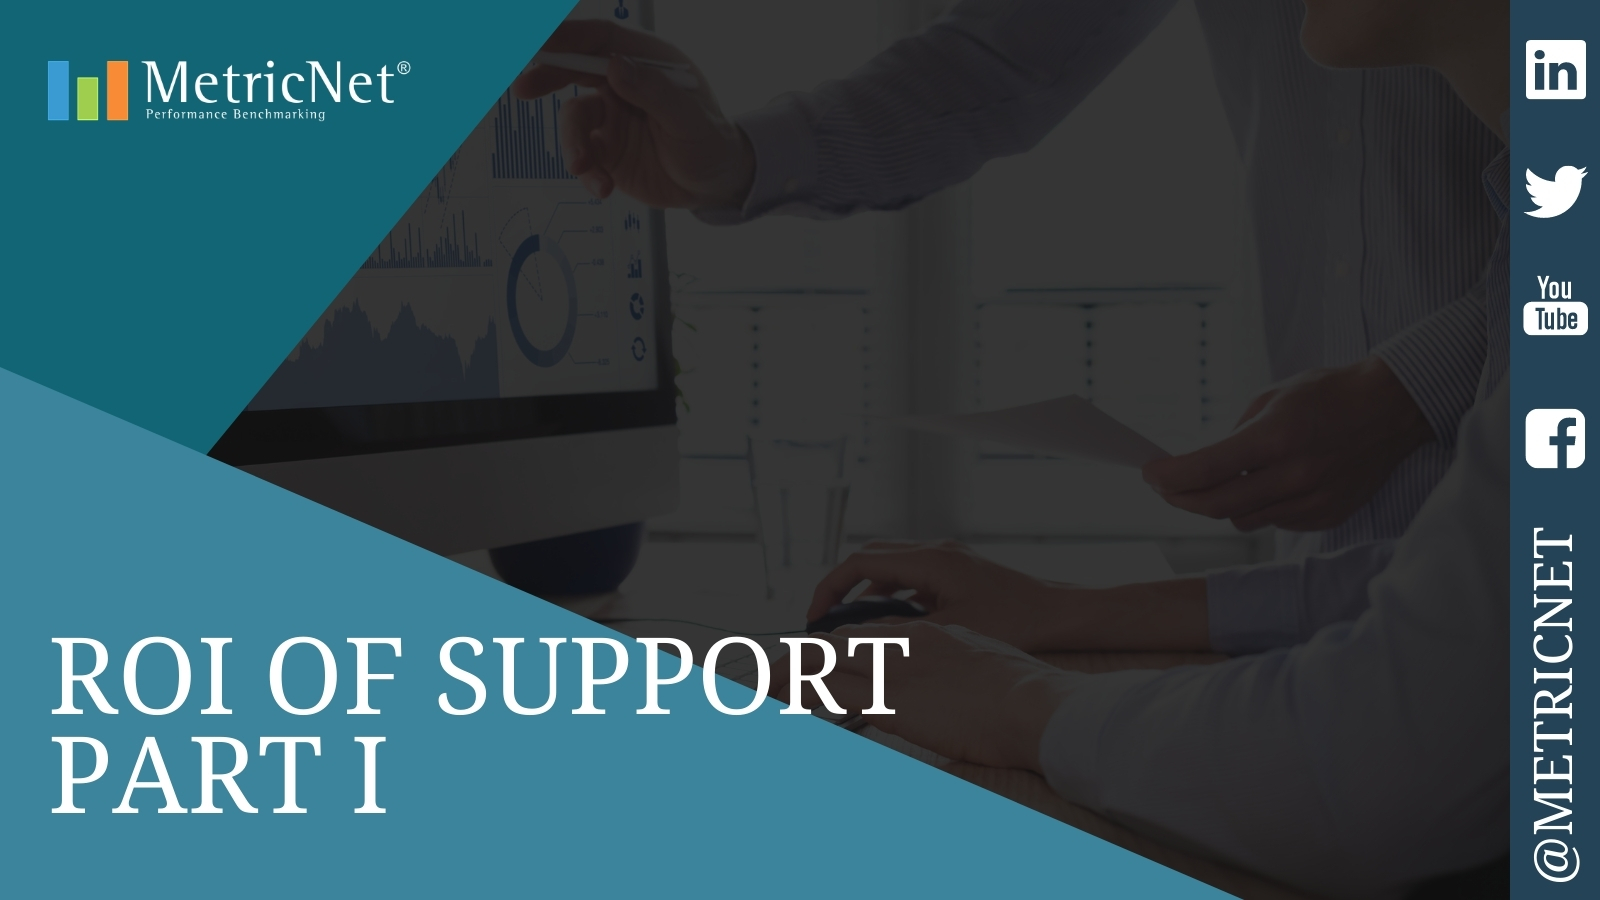 The ROI of Support Part I